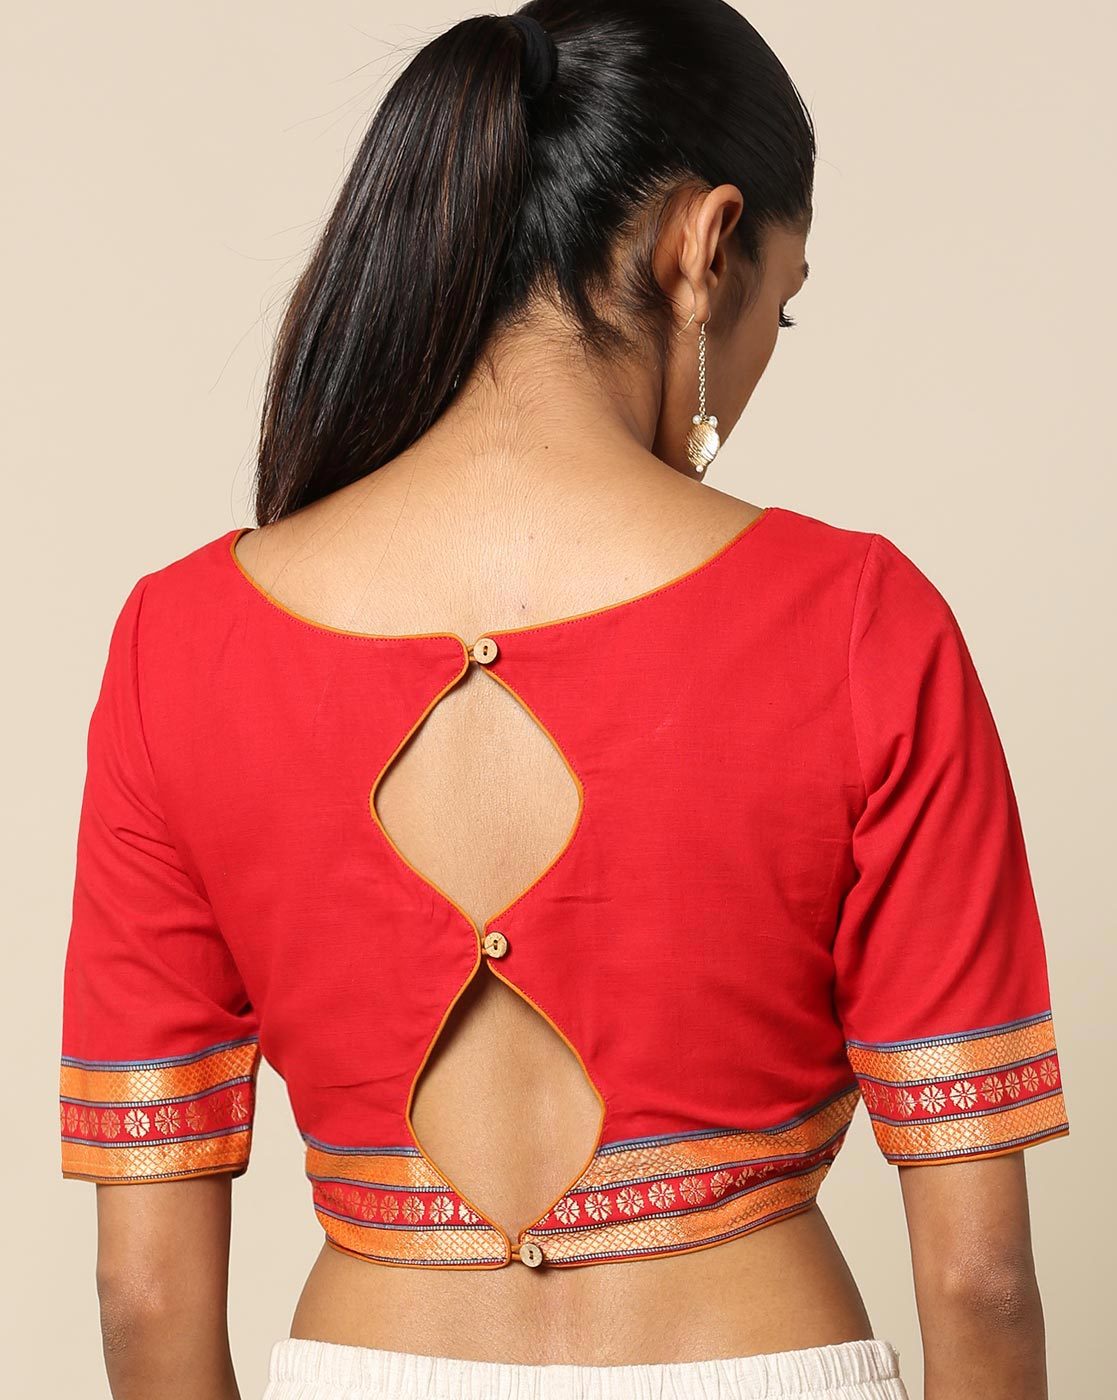 Blouse back neck designs with borders 2018 – Blouse Back Neck ...